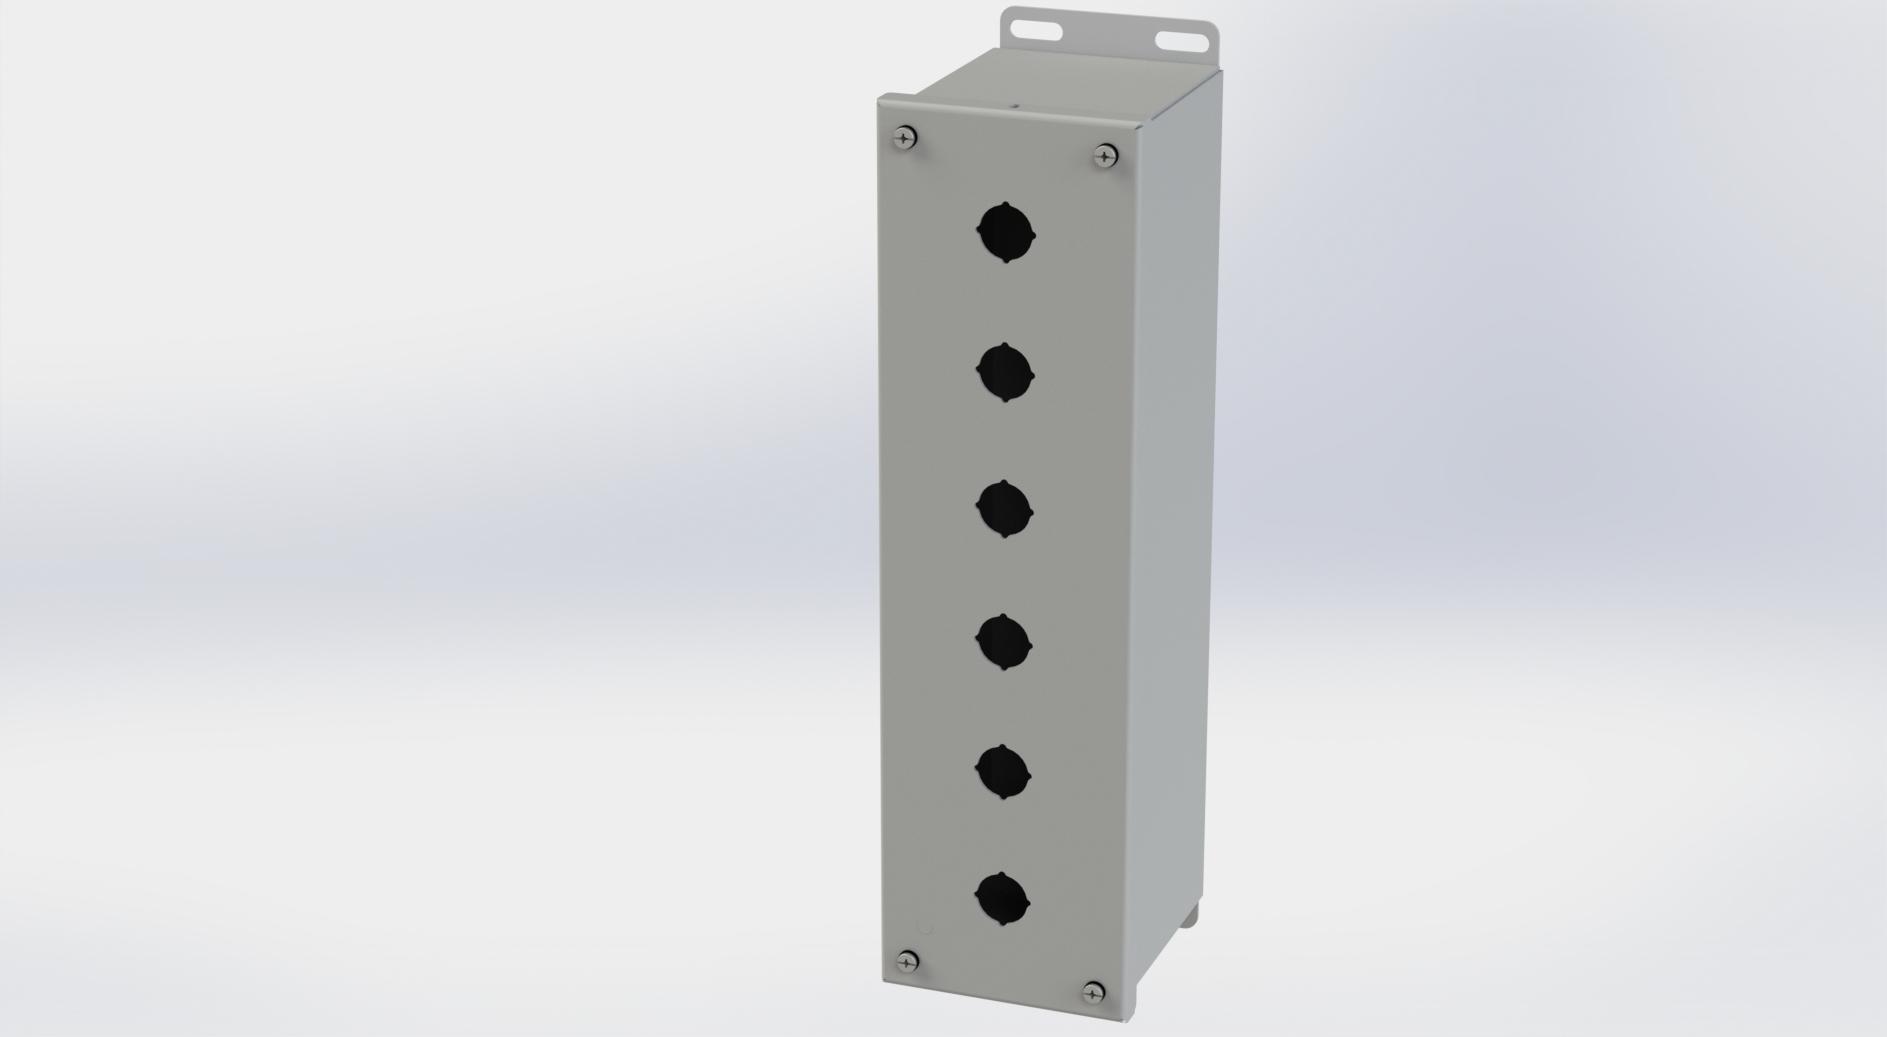 Saginaw Control SCE-6PBXVLI PBX Enclosure, Height:14.75", Width:4.00", Depth:4.75", ANSI-61 gray powder coating inside and out.